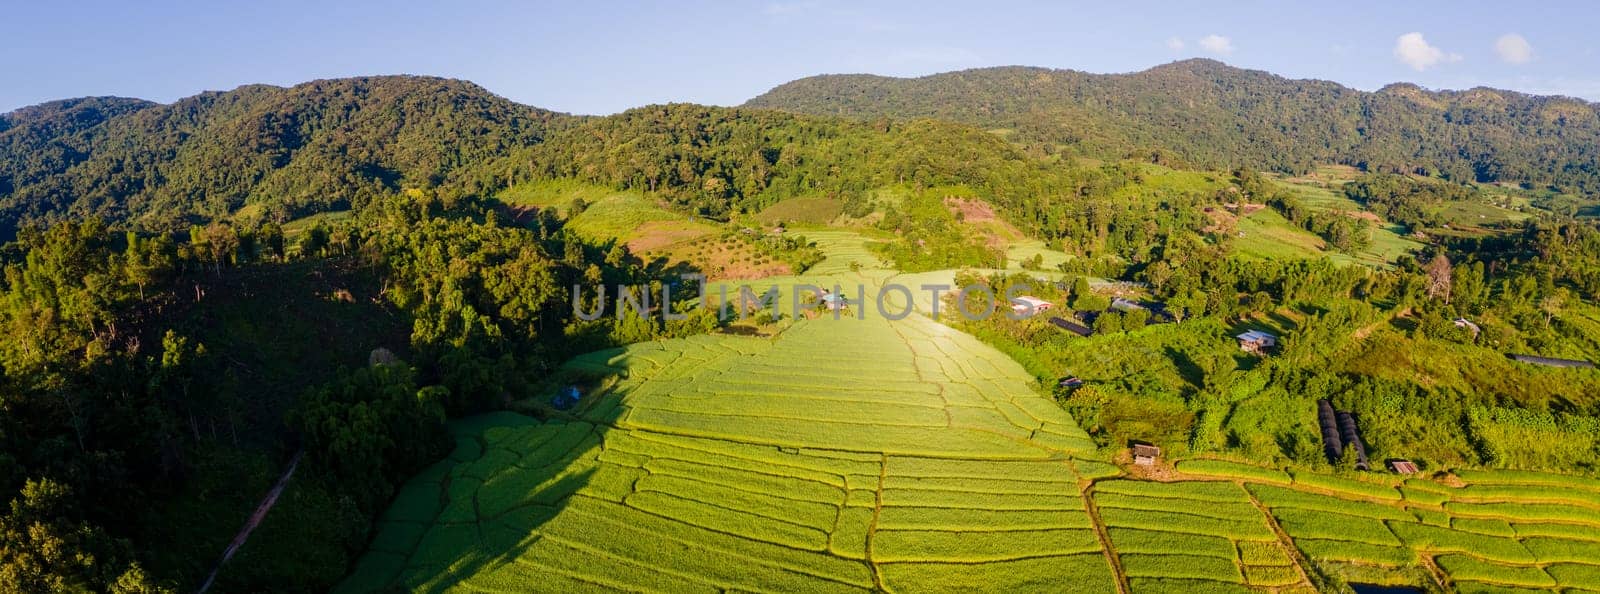 Drone aerial view at the green Terraced Rice Field in Chiangmai, Thailand, Pa Pong Piang rice terraces, green rice paddy fields during rain season